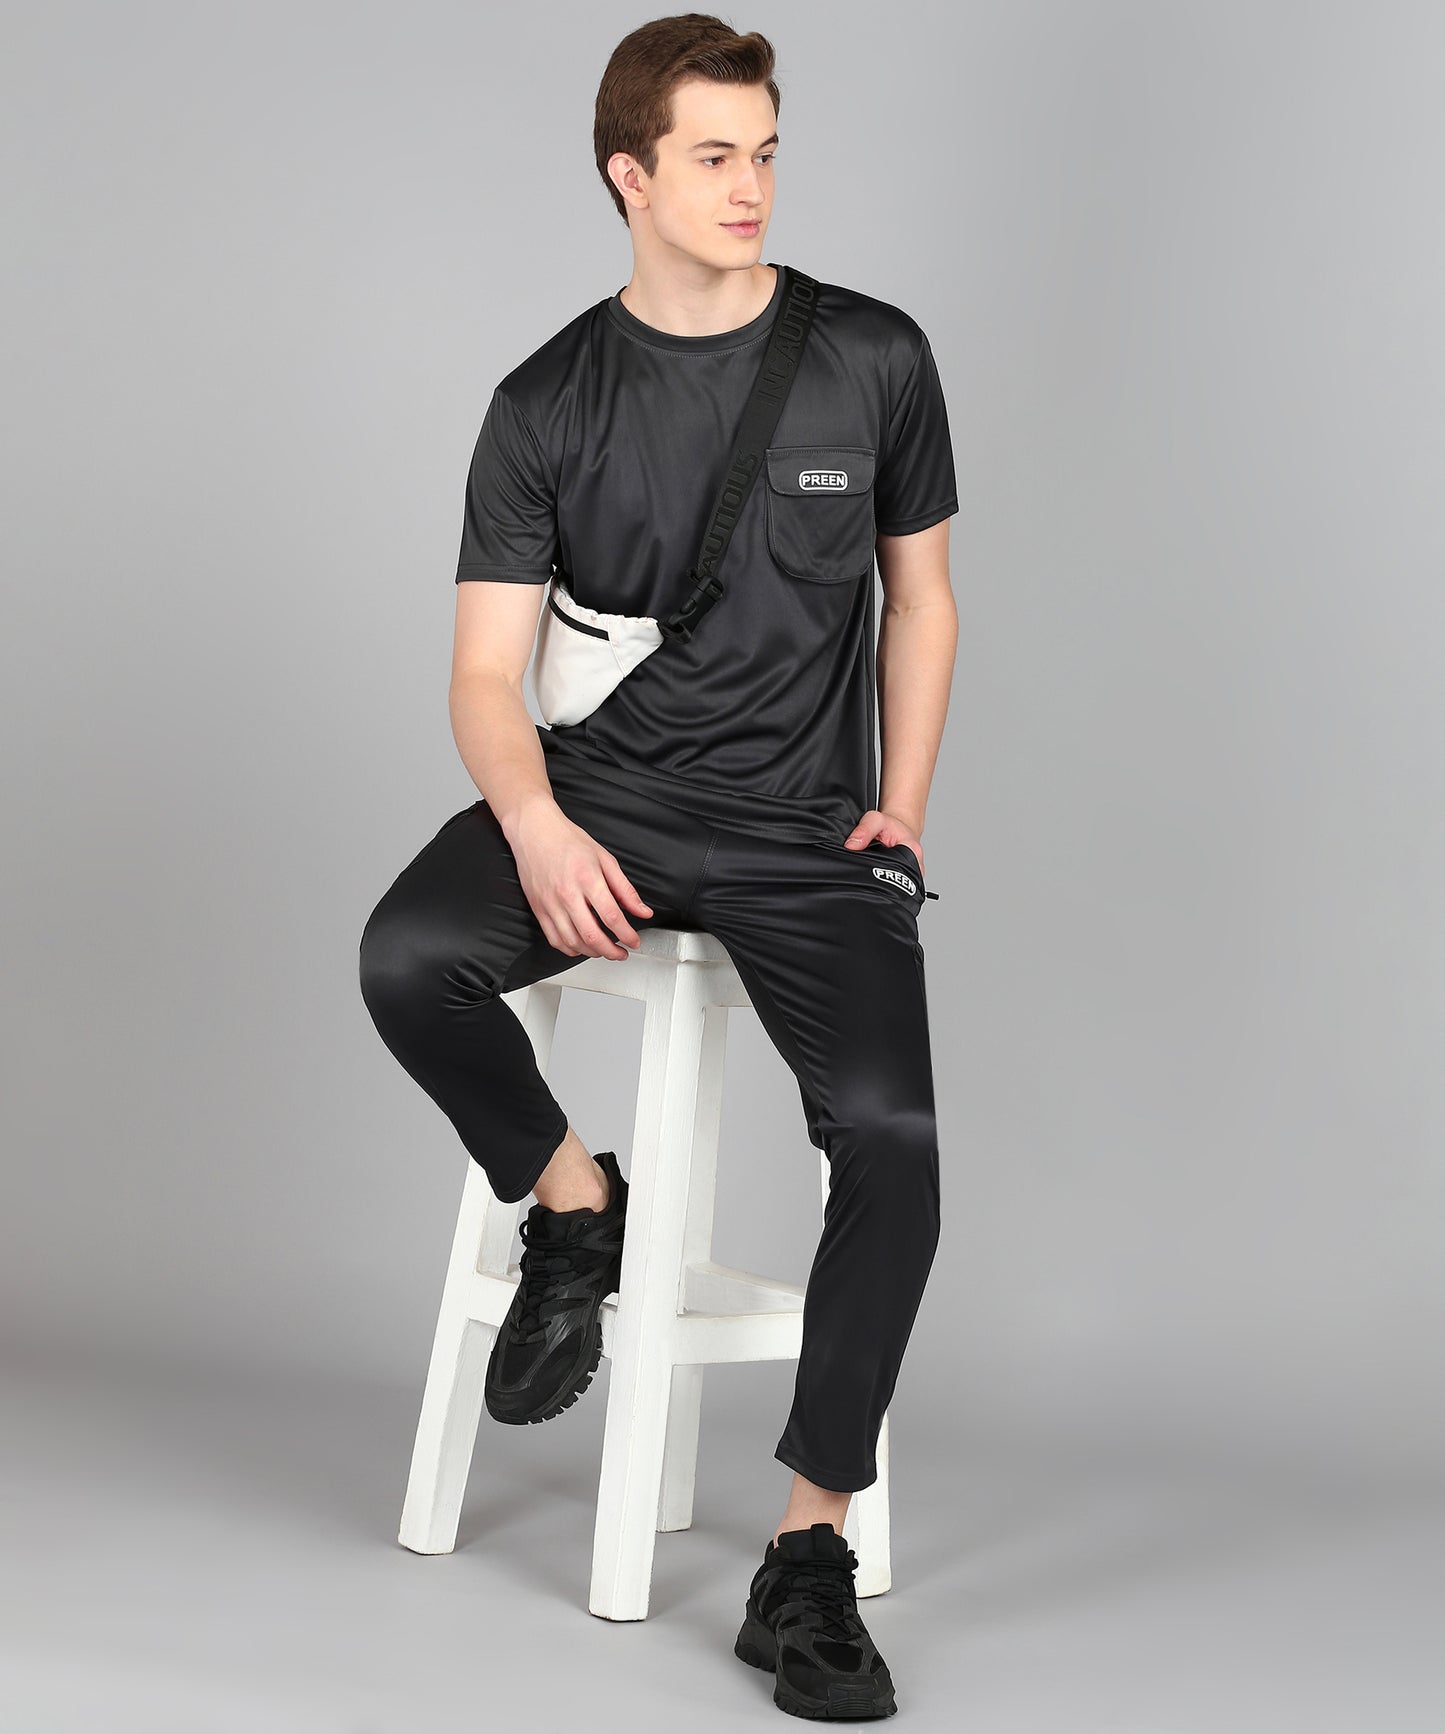 Preen Men's Solid T-shirt and Lower Set